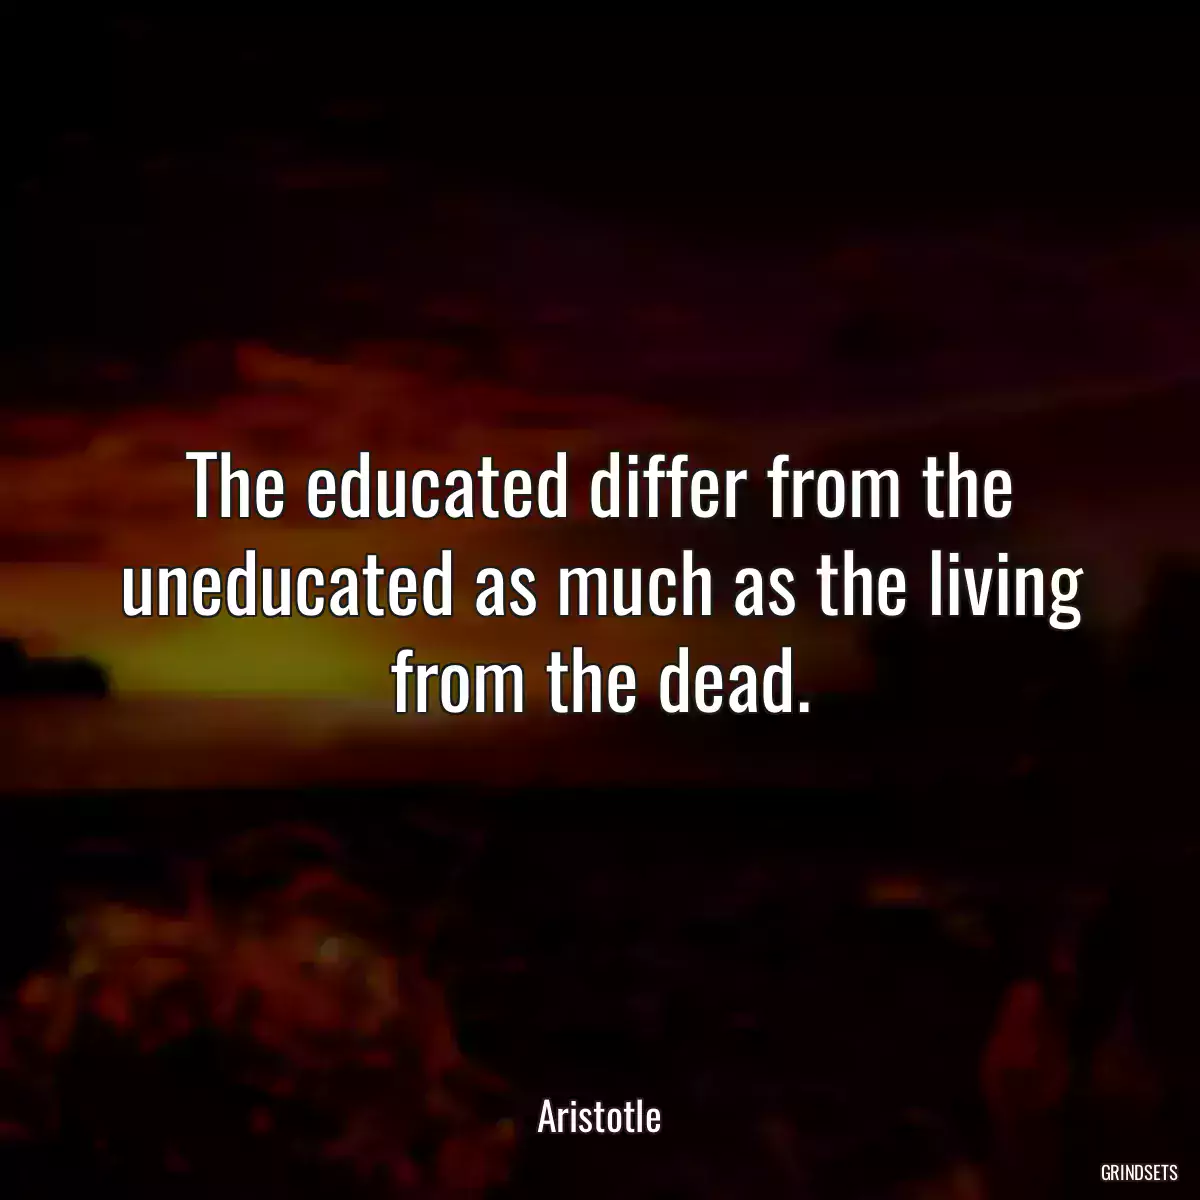 The educated differ from the uneducated as much as the living from the dead.